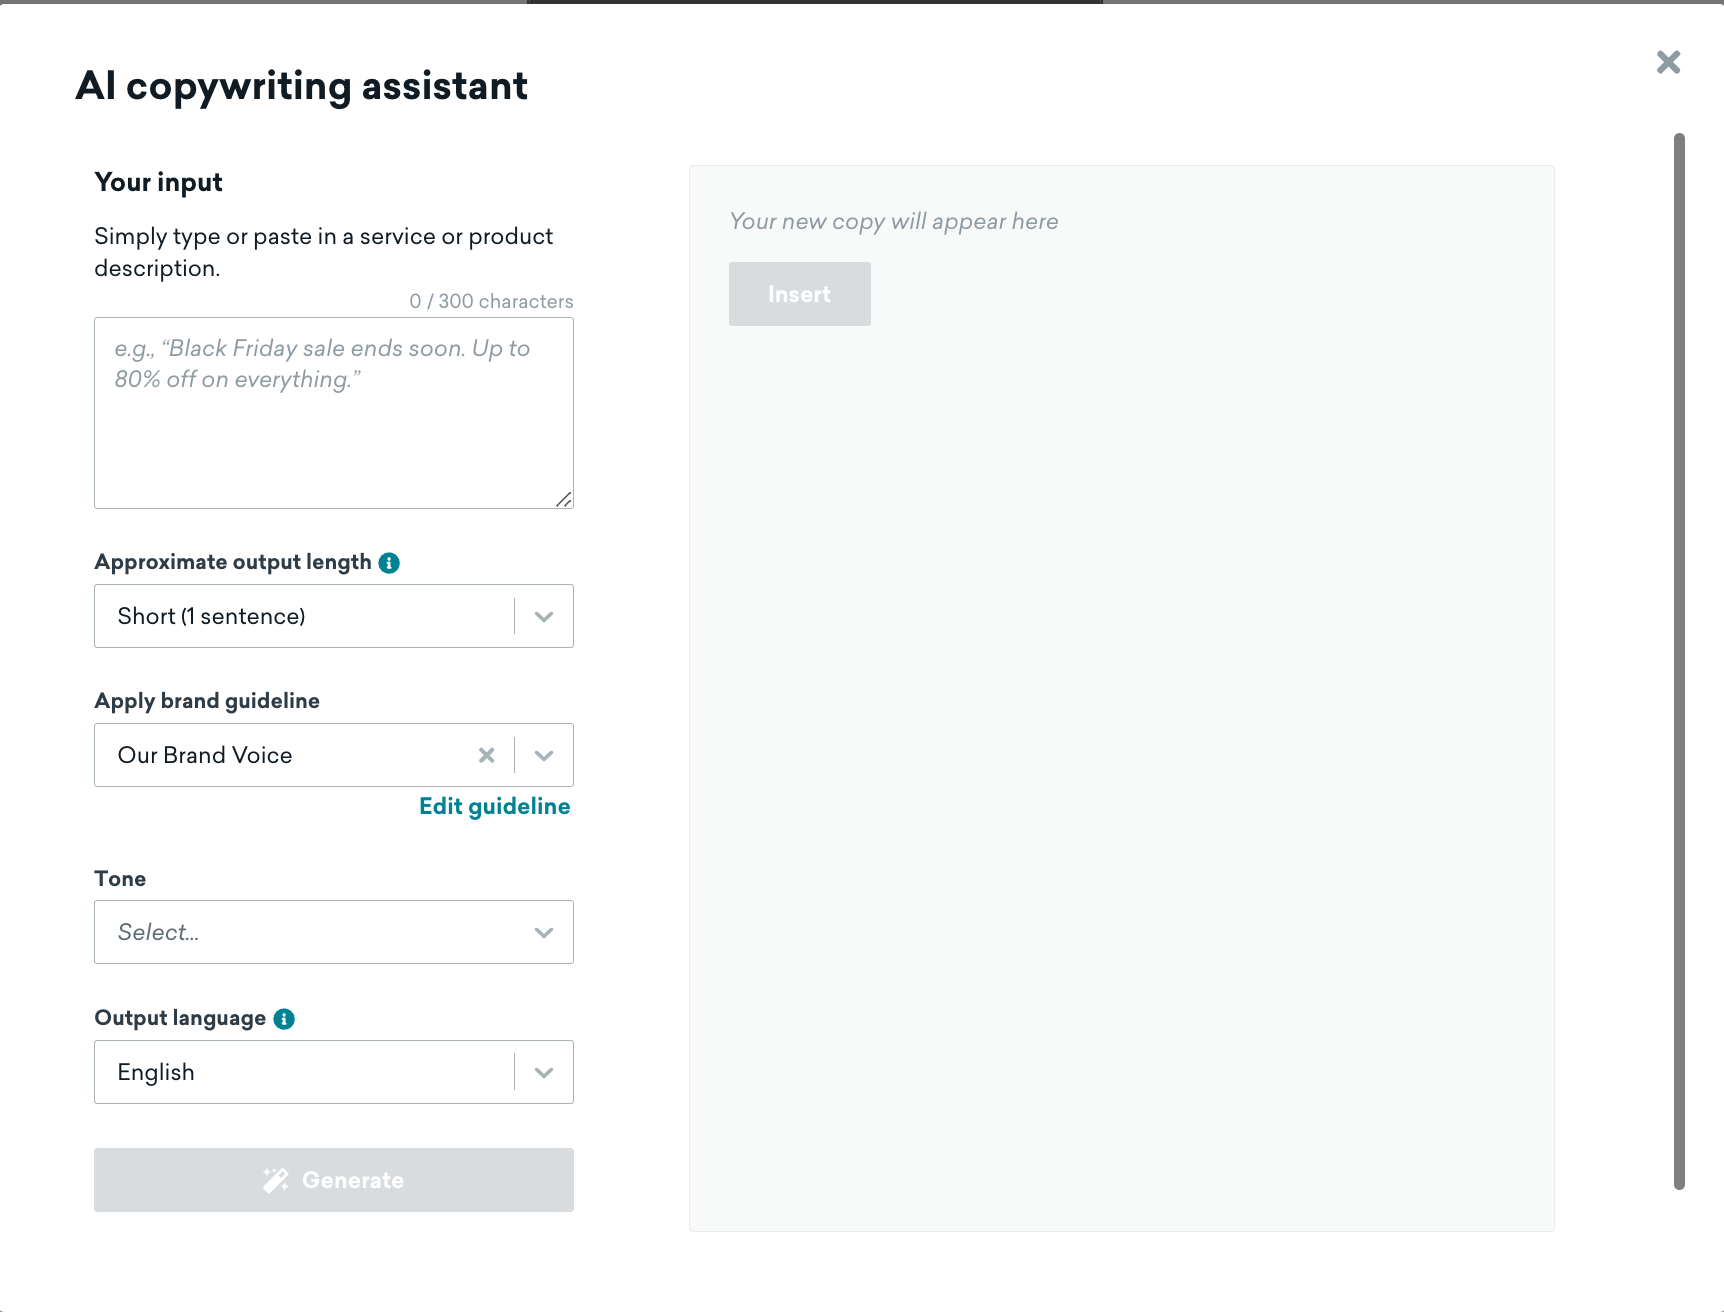 AI copywriting assistant modal showing various features available"